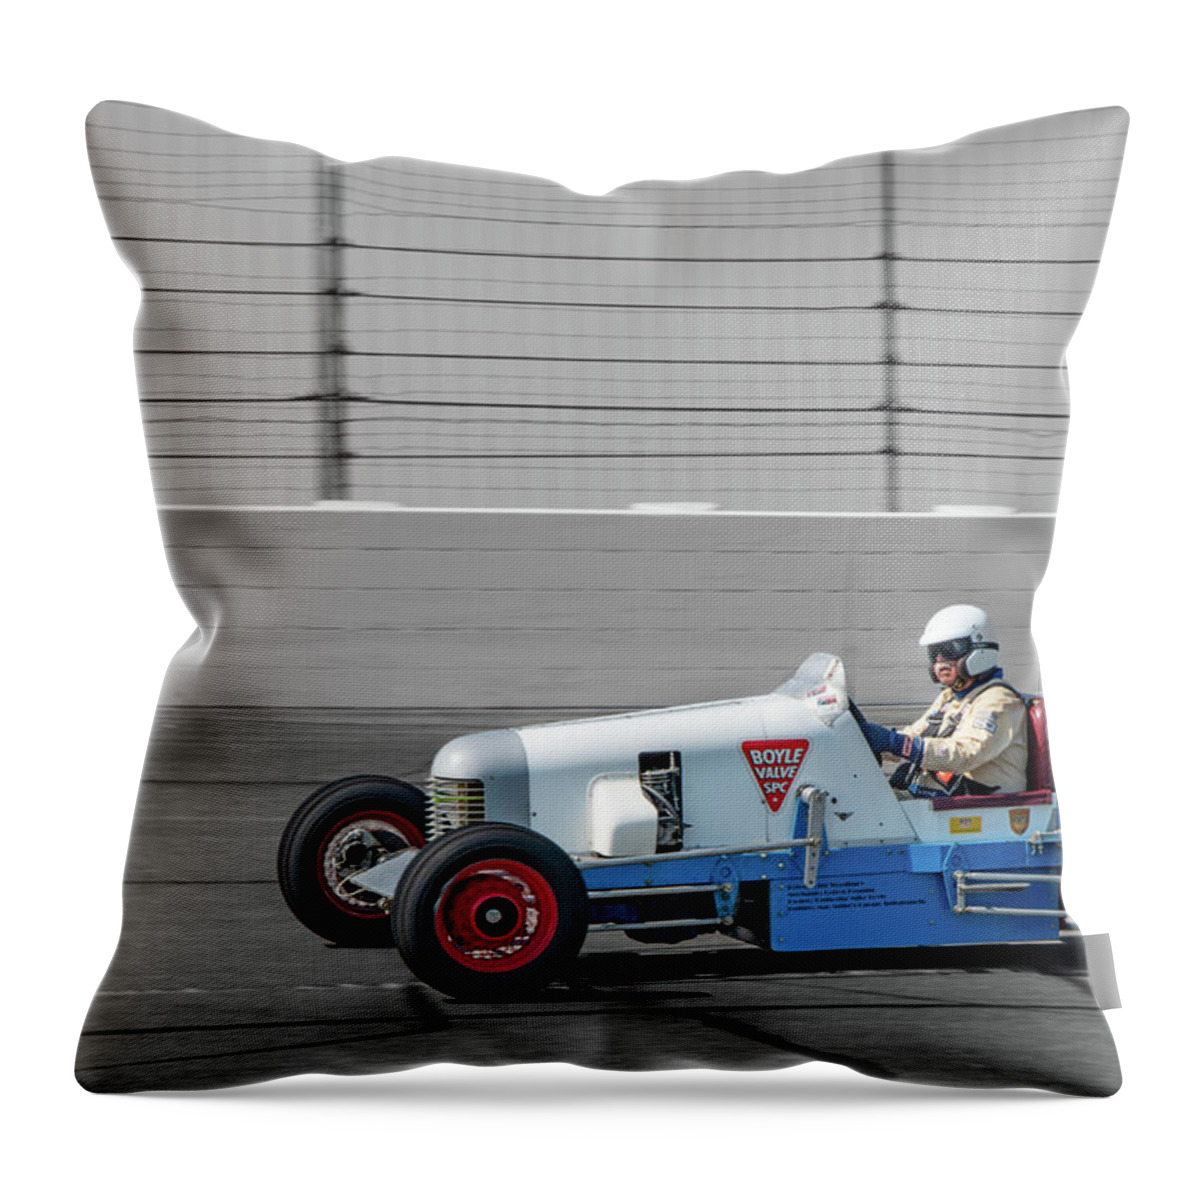 Svra Throw Pillow featuring the photograph 1927 Boyle by Josh Williams